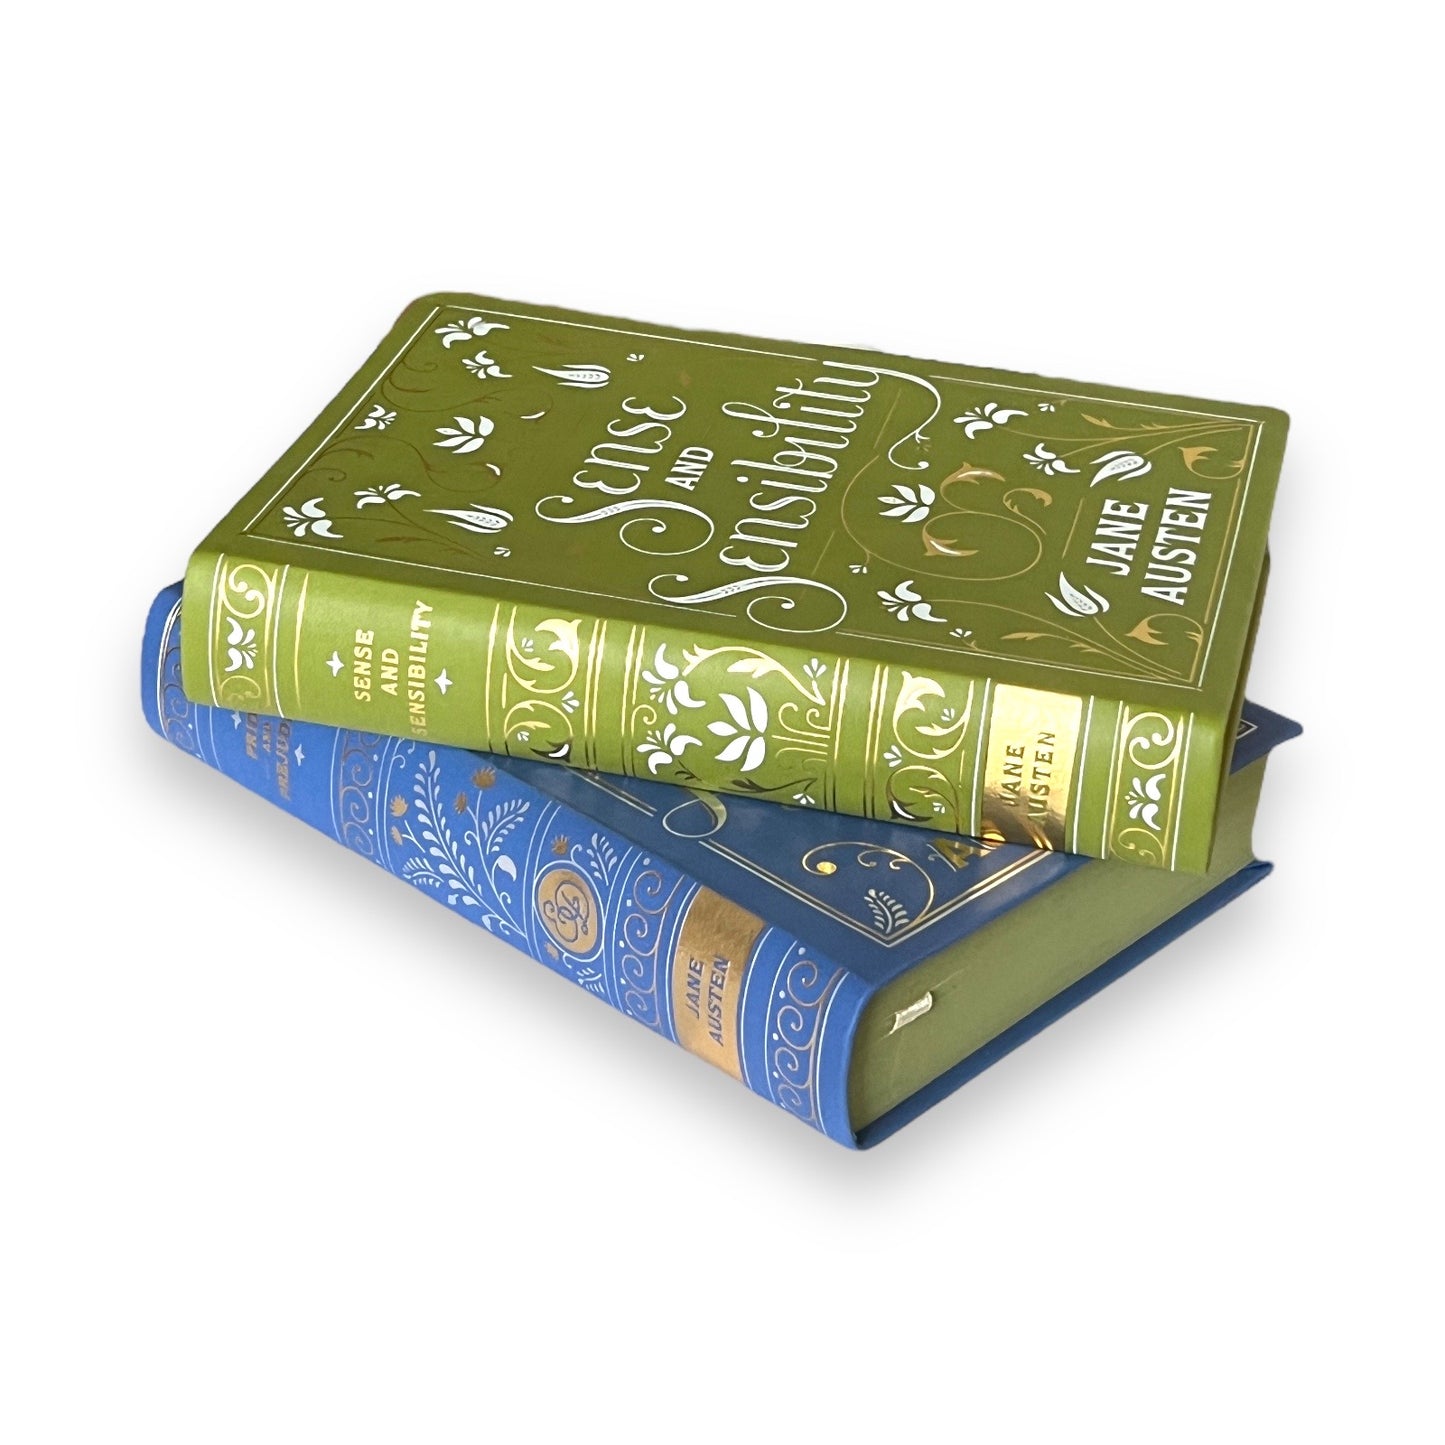 2 Books Set by Jane Austen: PRIDE And PREJUDICE & SENSE And Sensibility - Collectible Special Edition - Flexi Bound Faux Leather Cover